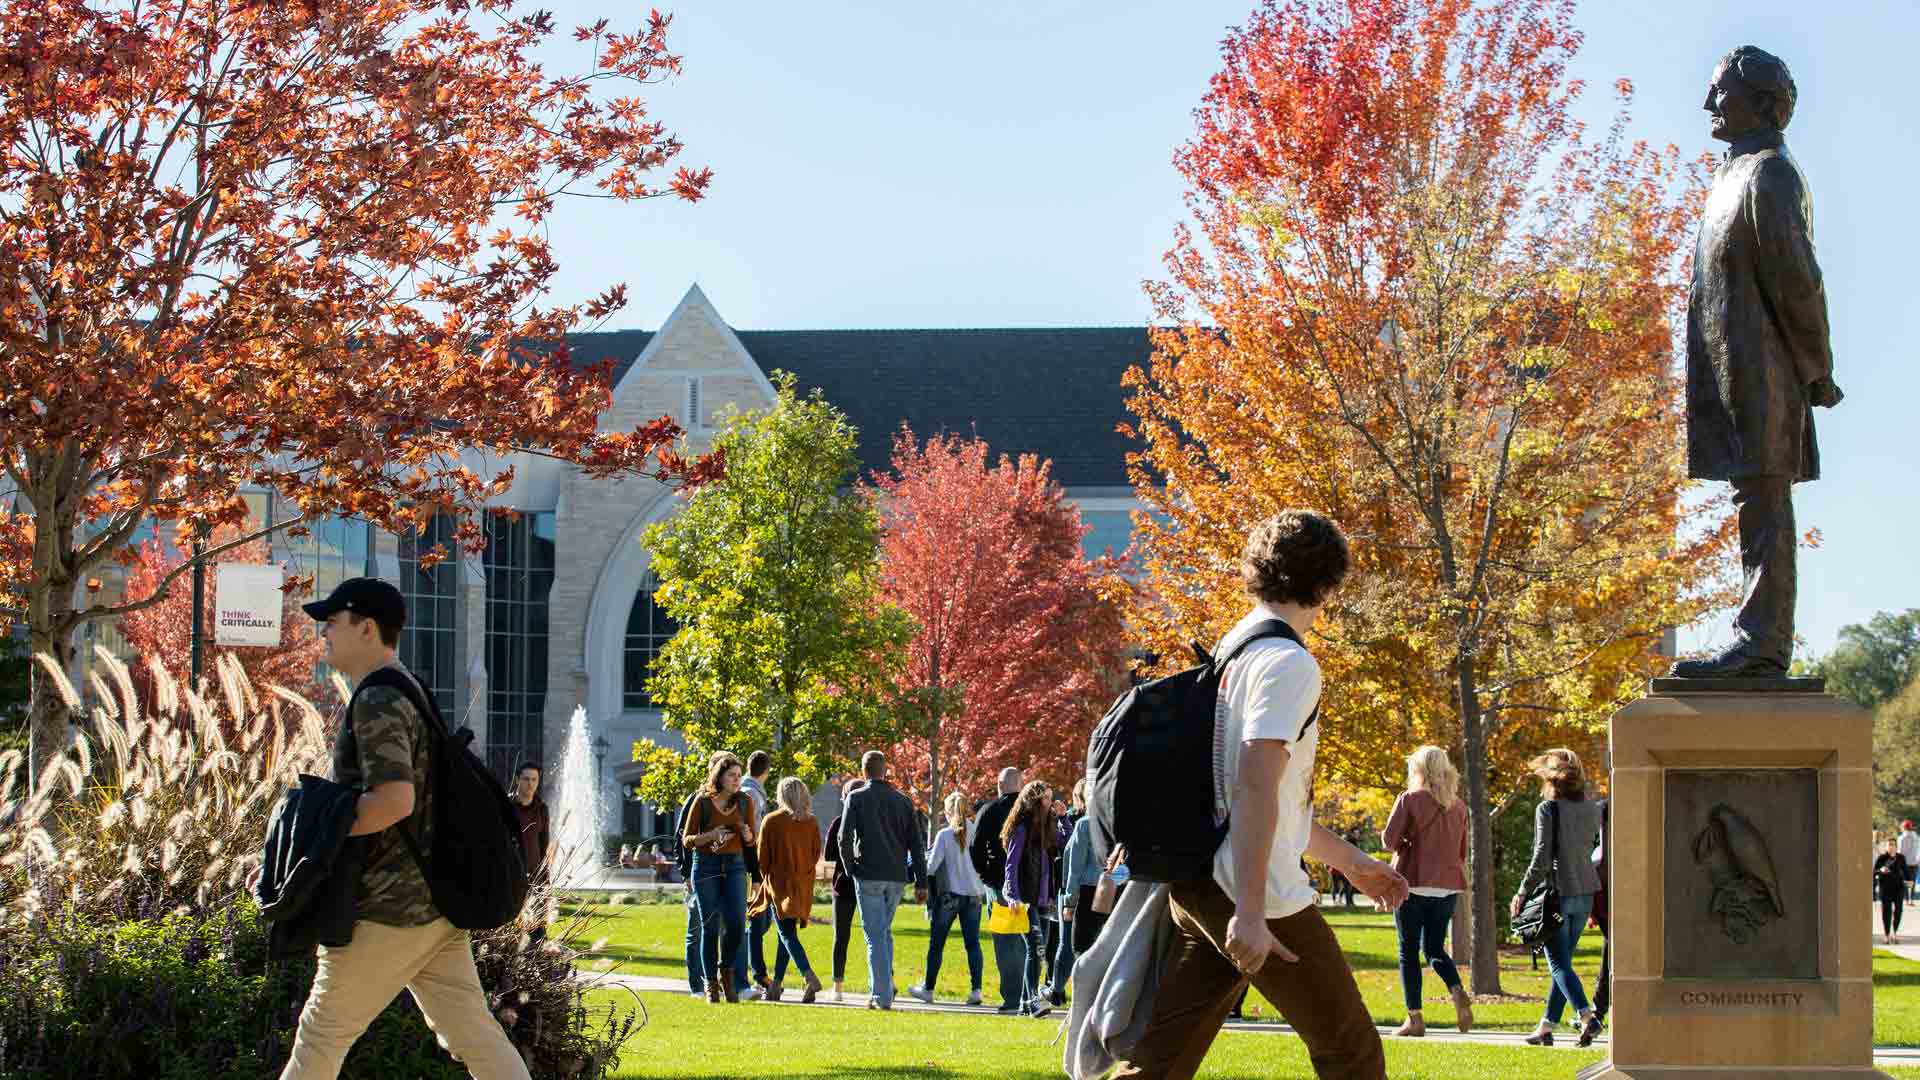 St. Thomas students walk through campus during the fall.